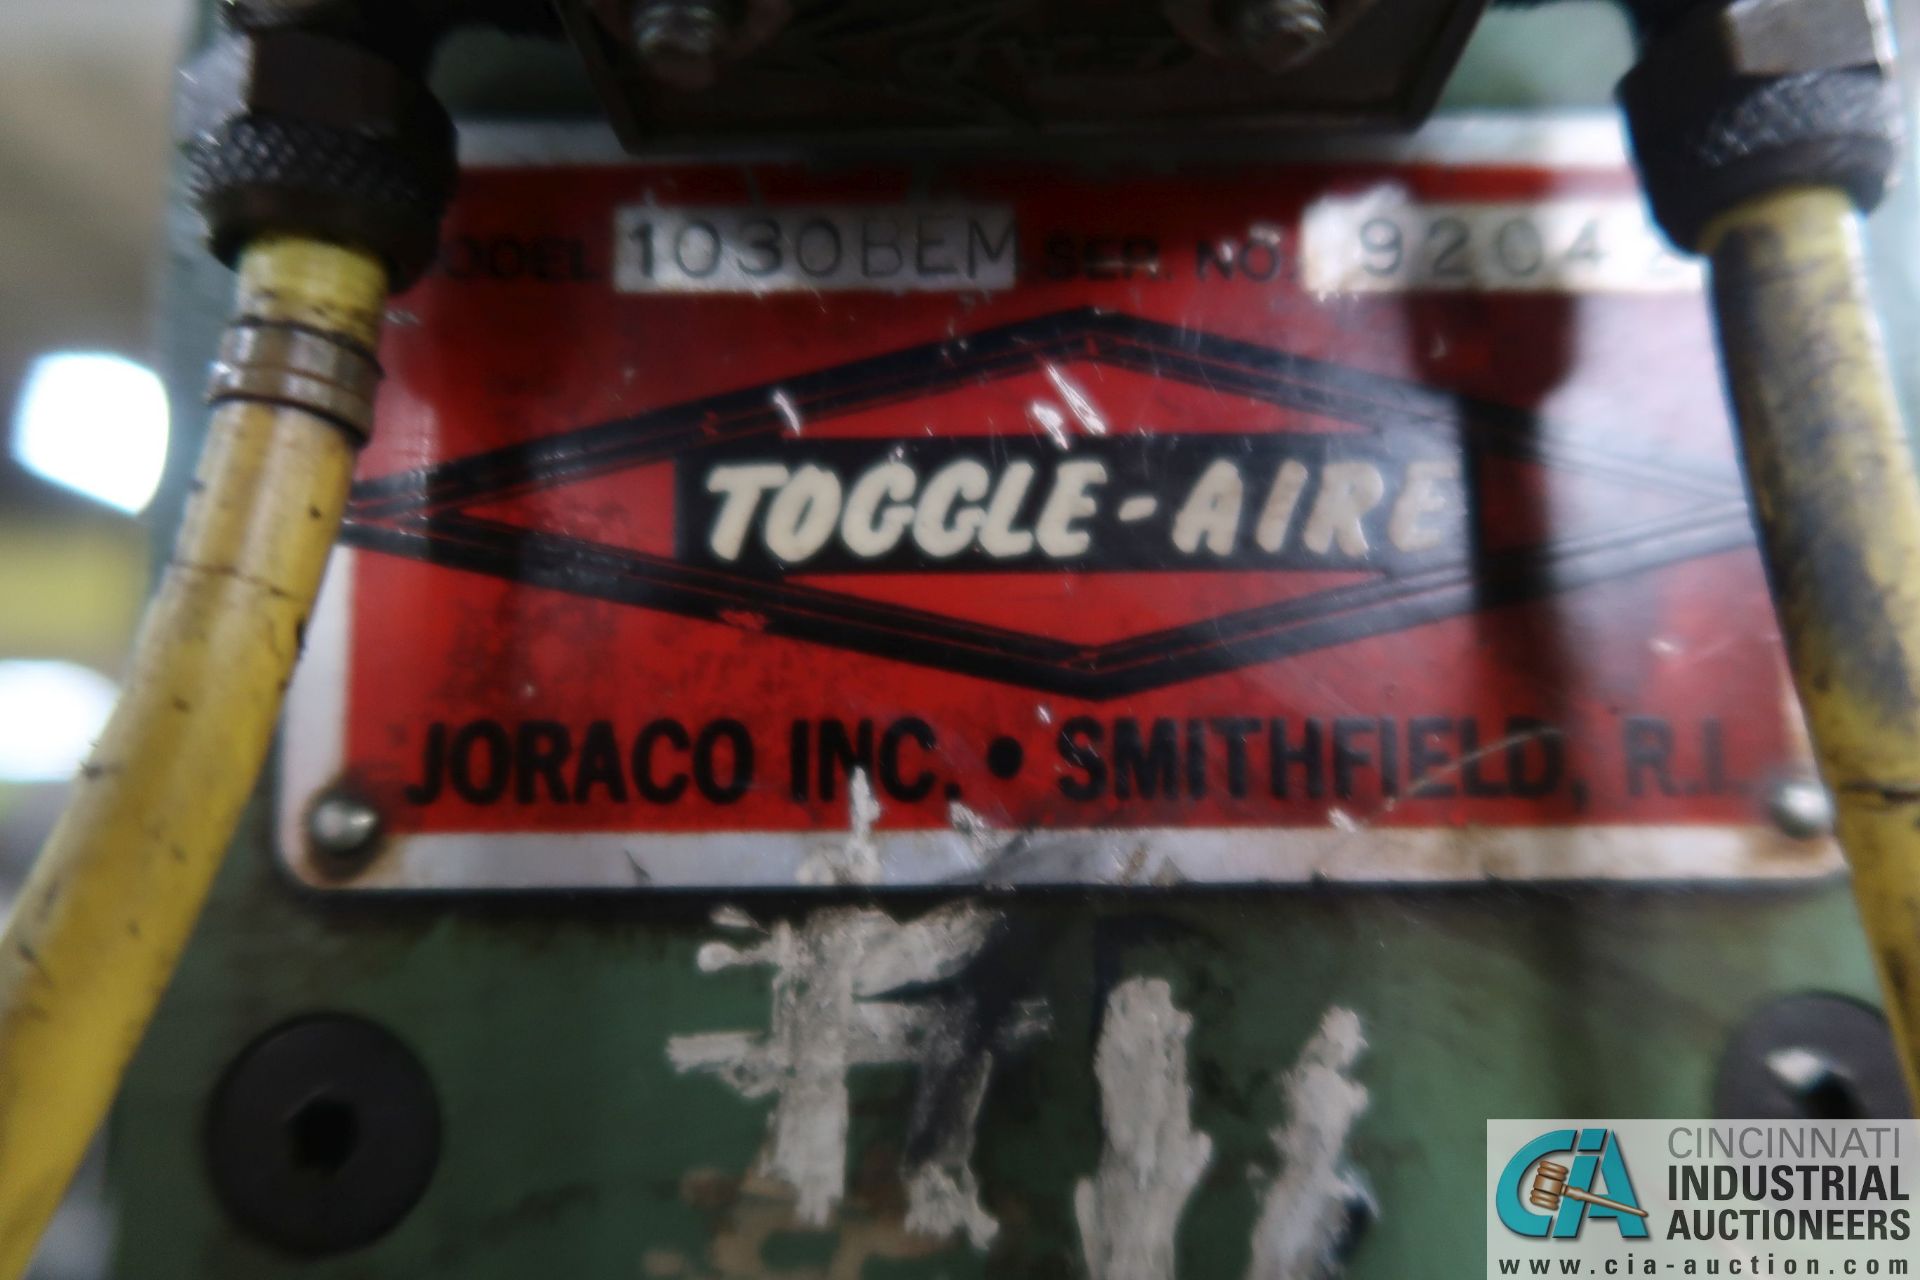 JORCO MODEL SSDM TOGGLE-AIR BENCH TOP PRESS; S/N N/A, DUAL LEVER CONTROLS - Image 3 of 3